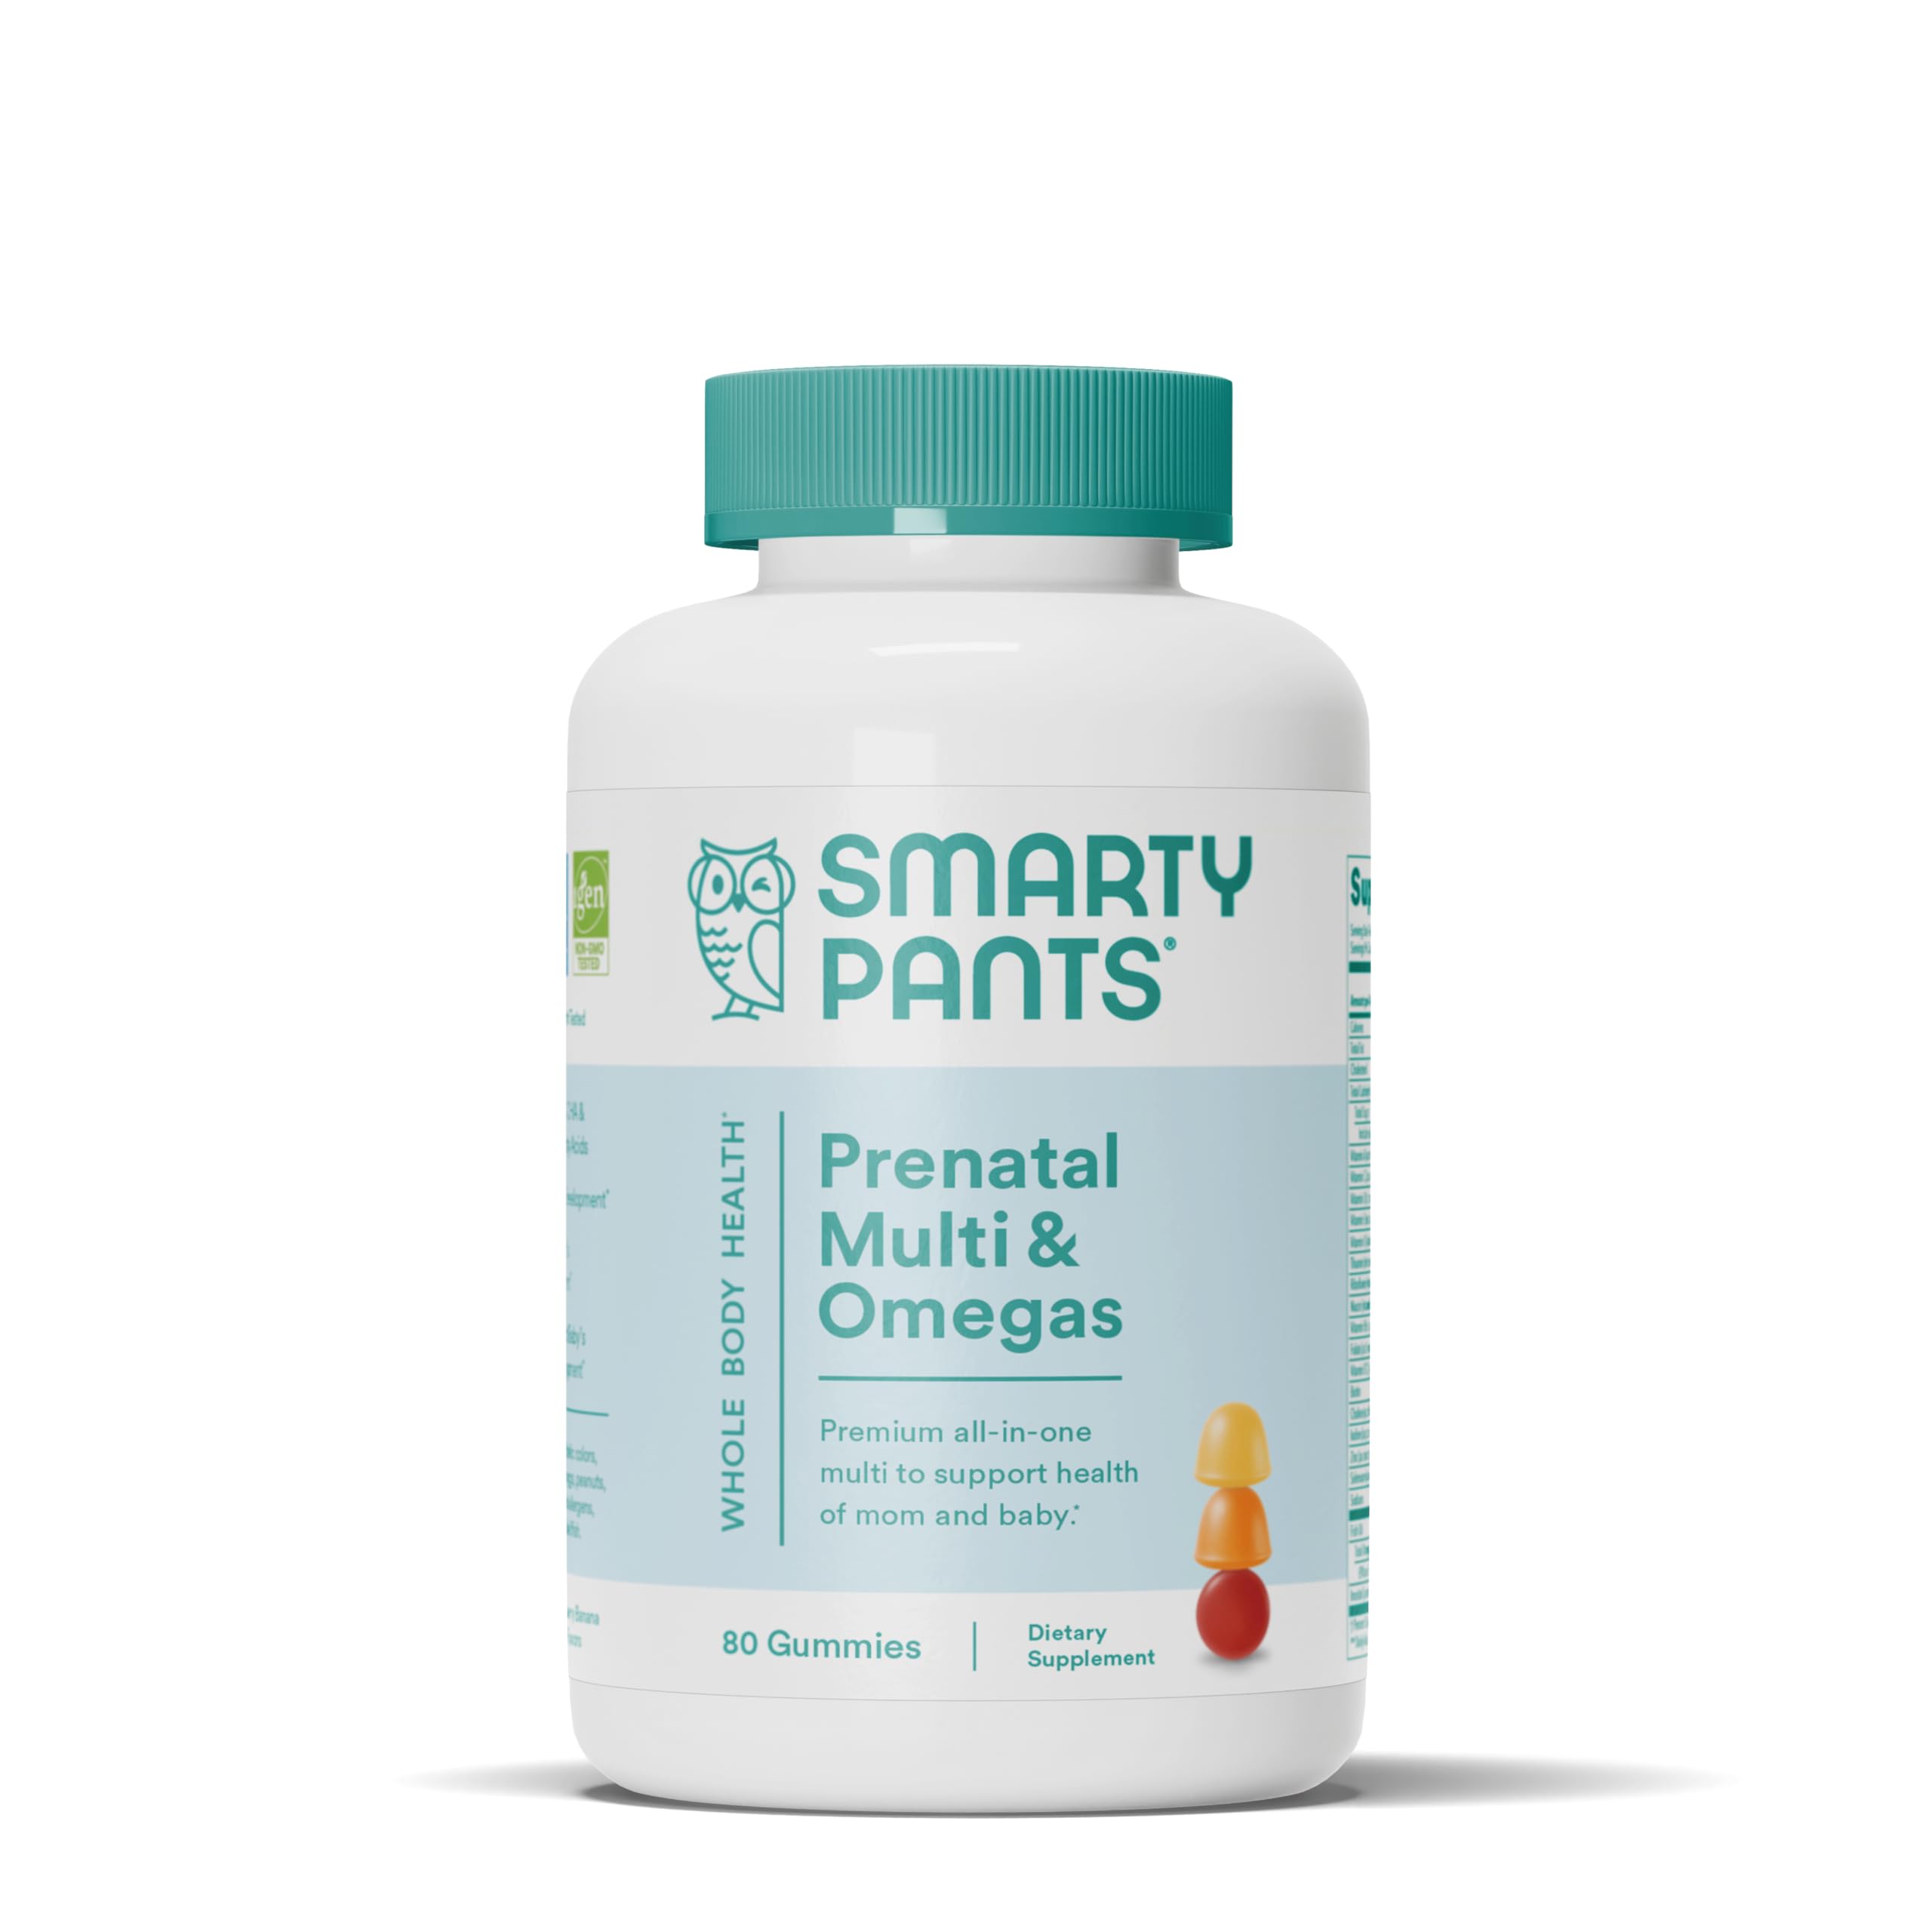 SmartyPants Prenatal Vitamins for Women with DHA and Methylfolate - Daily Gummy Multivitamin: Vitamin C, B12, D3, Zinc for Immun